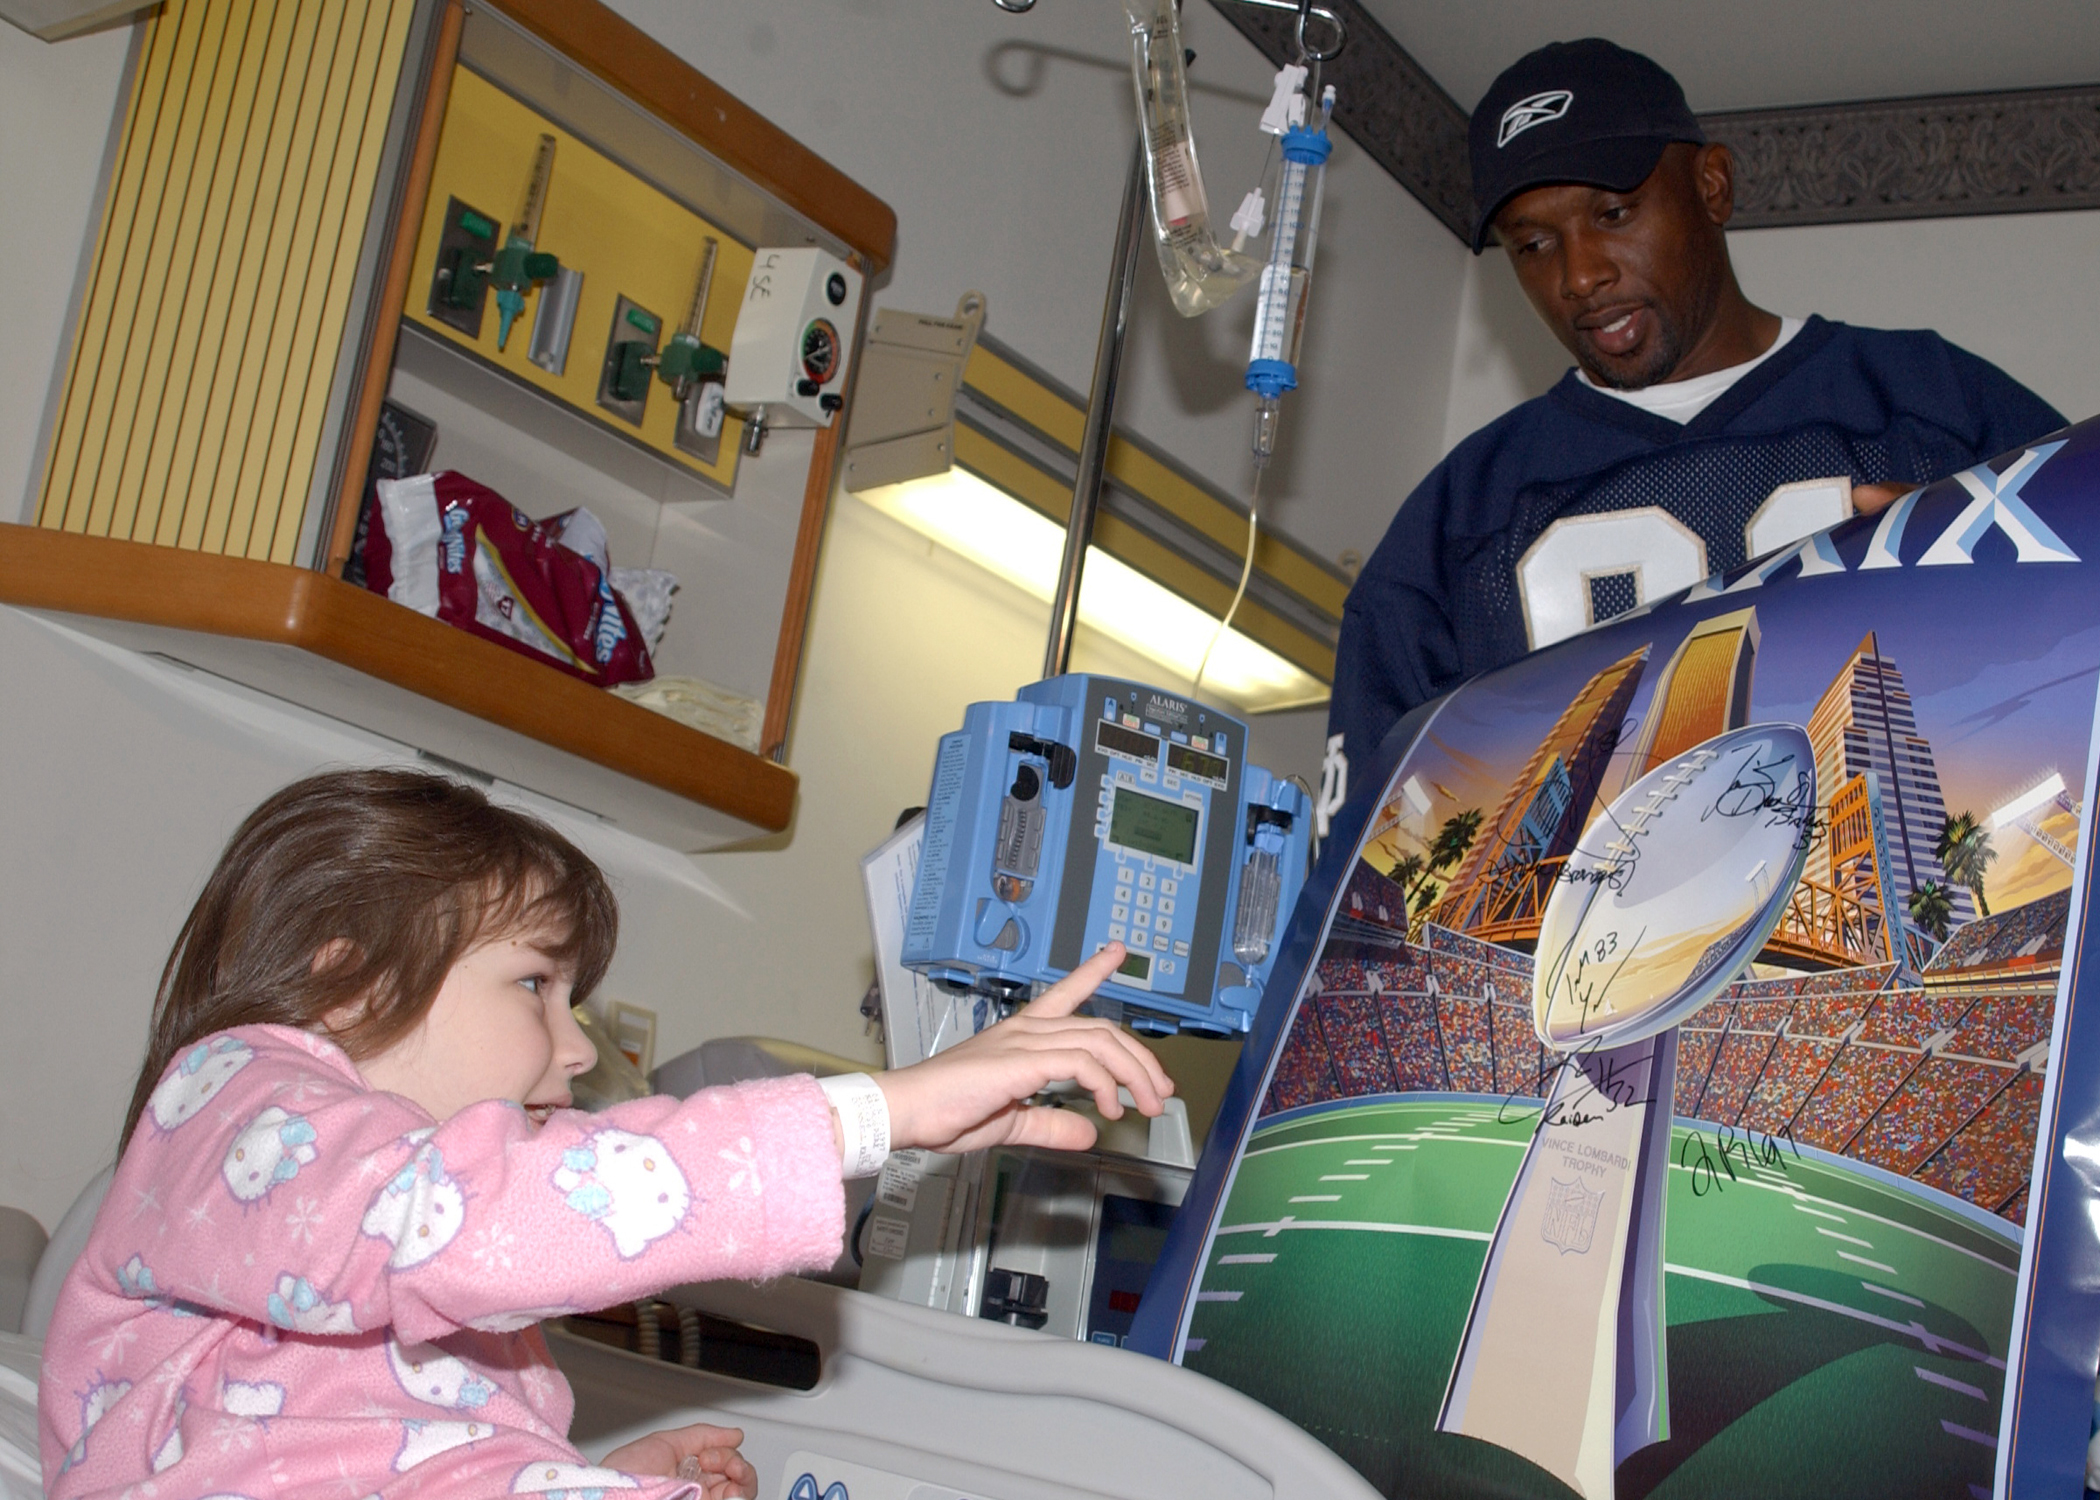 File:US Navy 050131-N-8544C-016 Child receives an autographed poster from Buccaneer wide receiver Tim Brown during Super Bowl XXXIX festivities.jpg - Wikimedia Commons